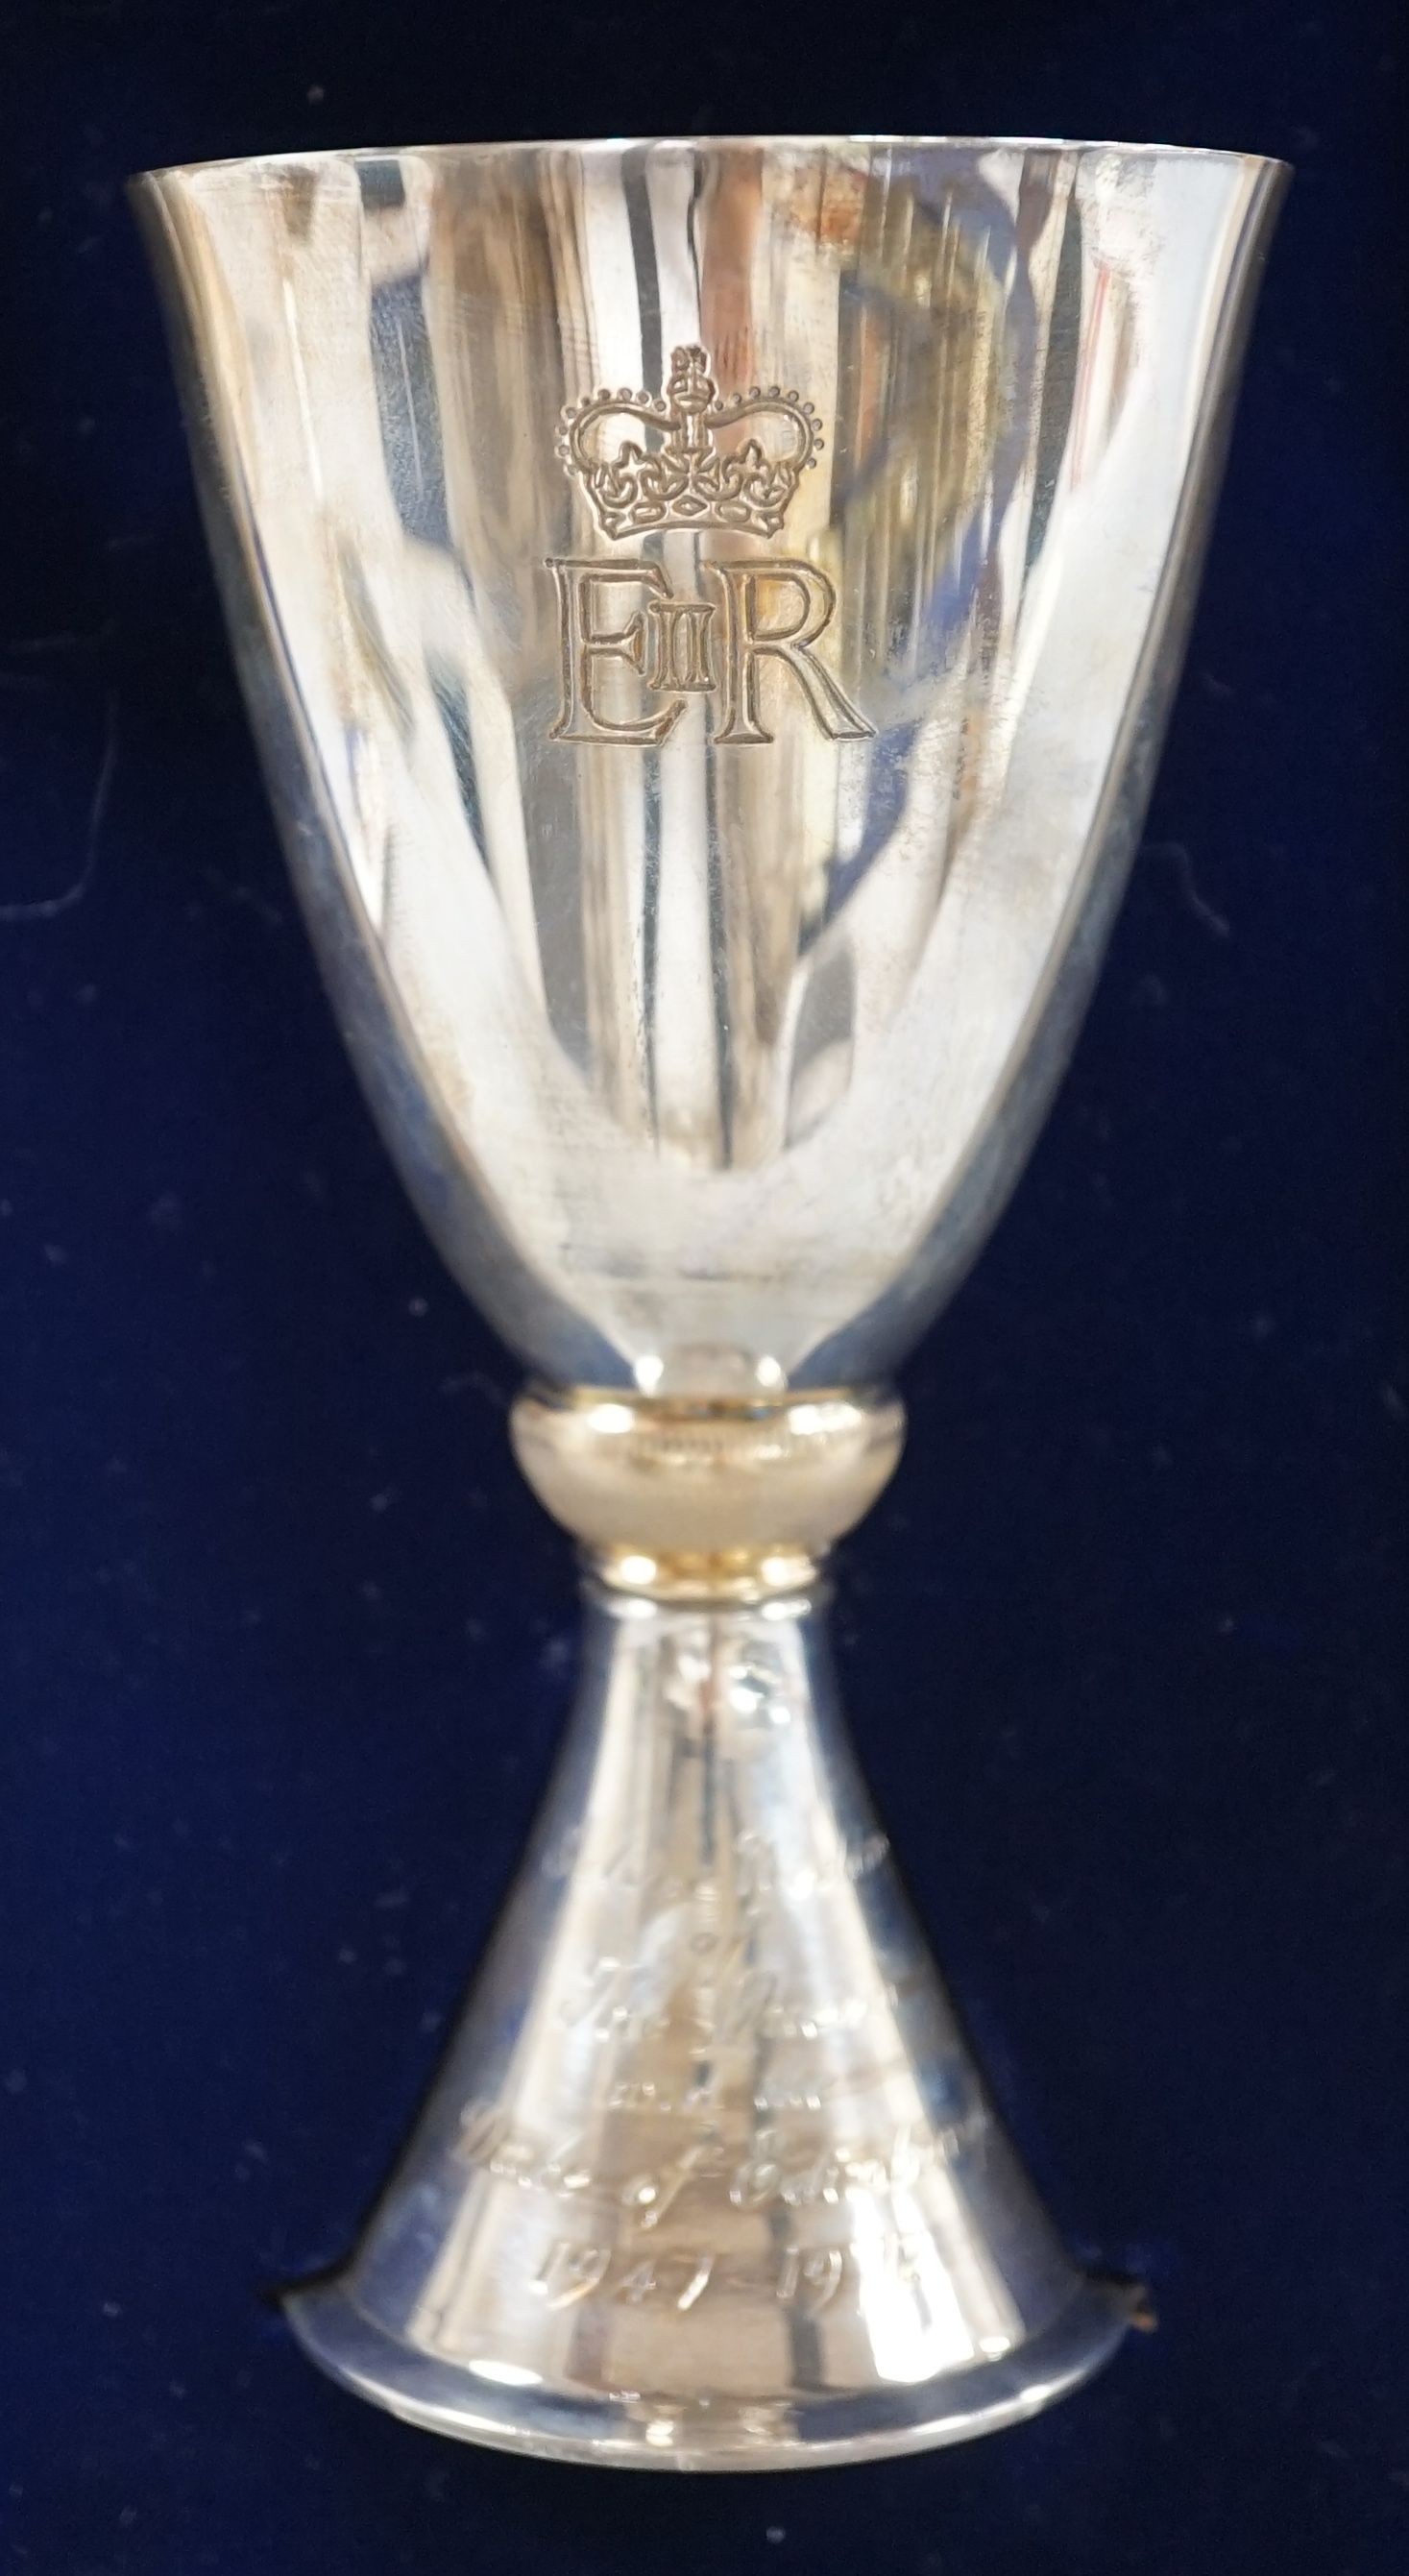 A cased Mappin and Webb parcel gilt silver limited edition QEII Silver Wedding Anniversary goblet, numbered 359/1000, London, 1972, 15.5cm, 7oz.